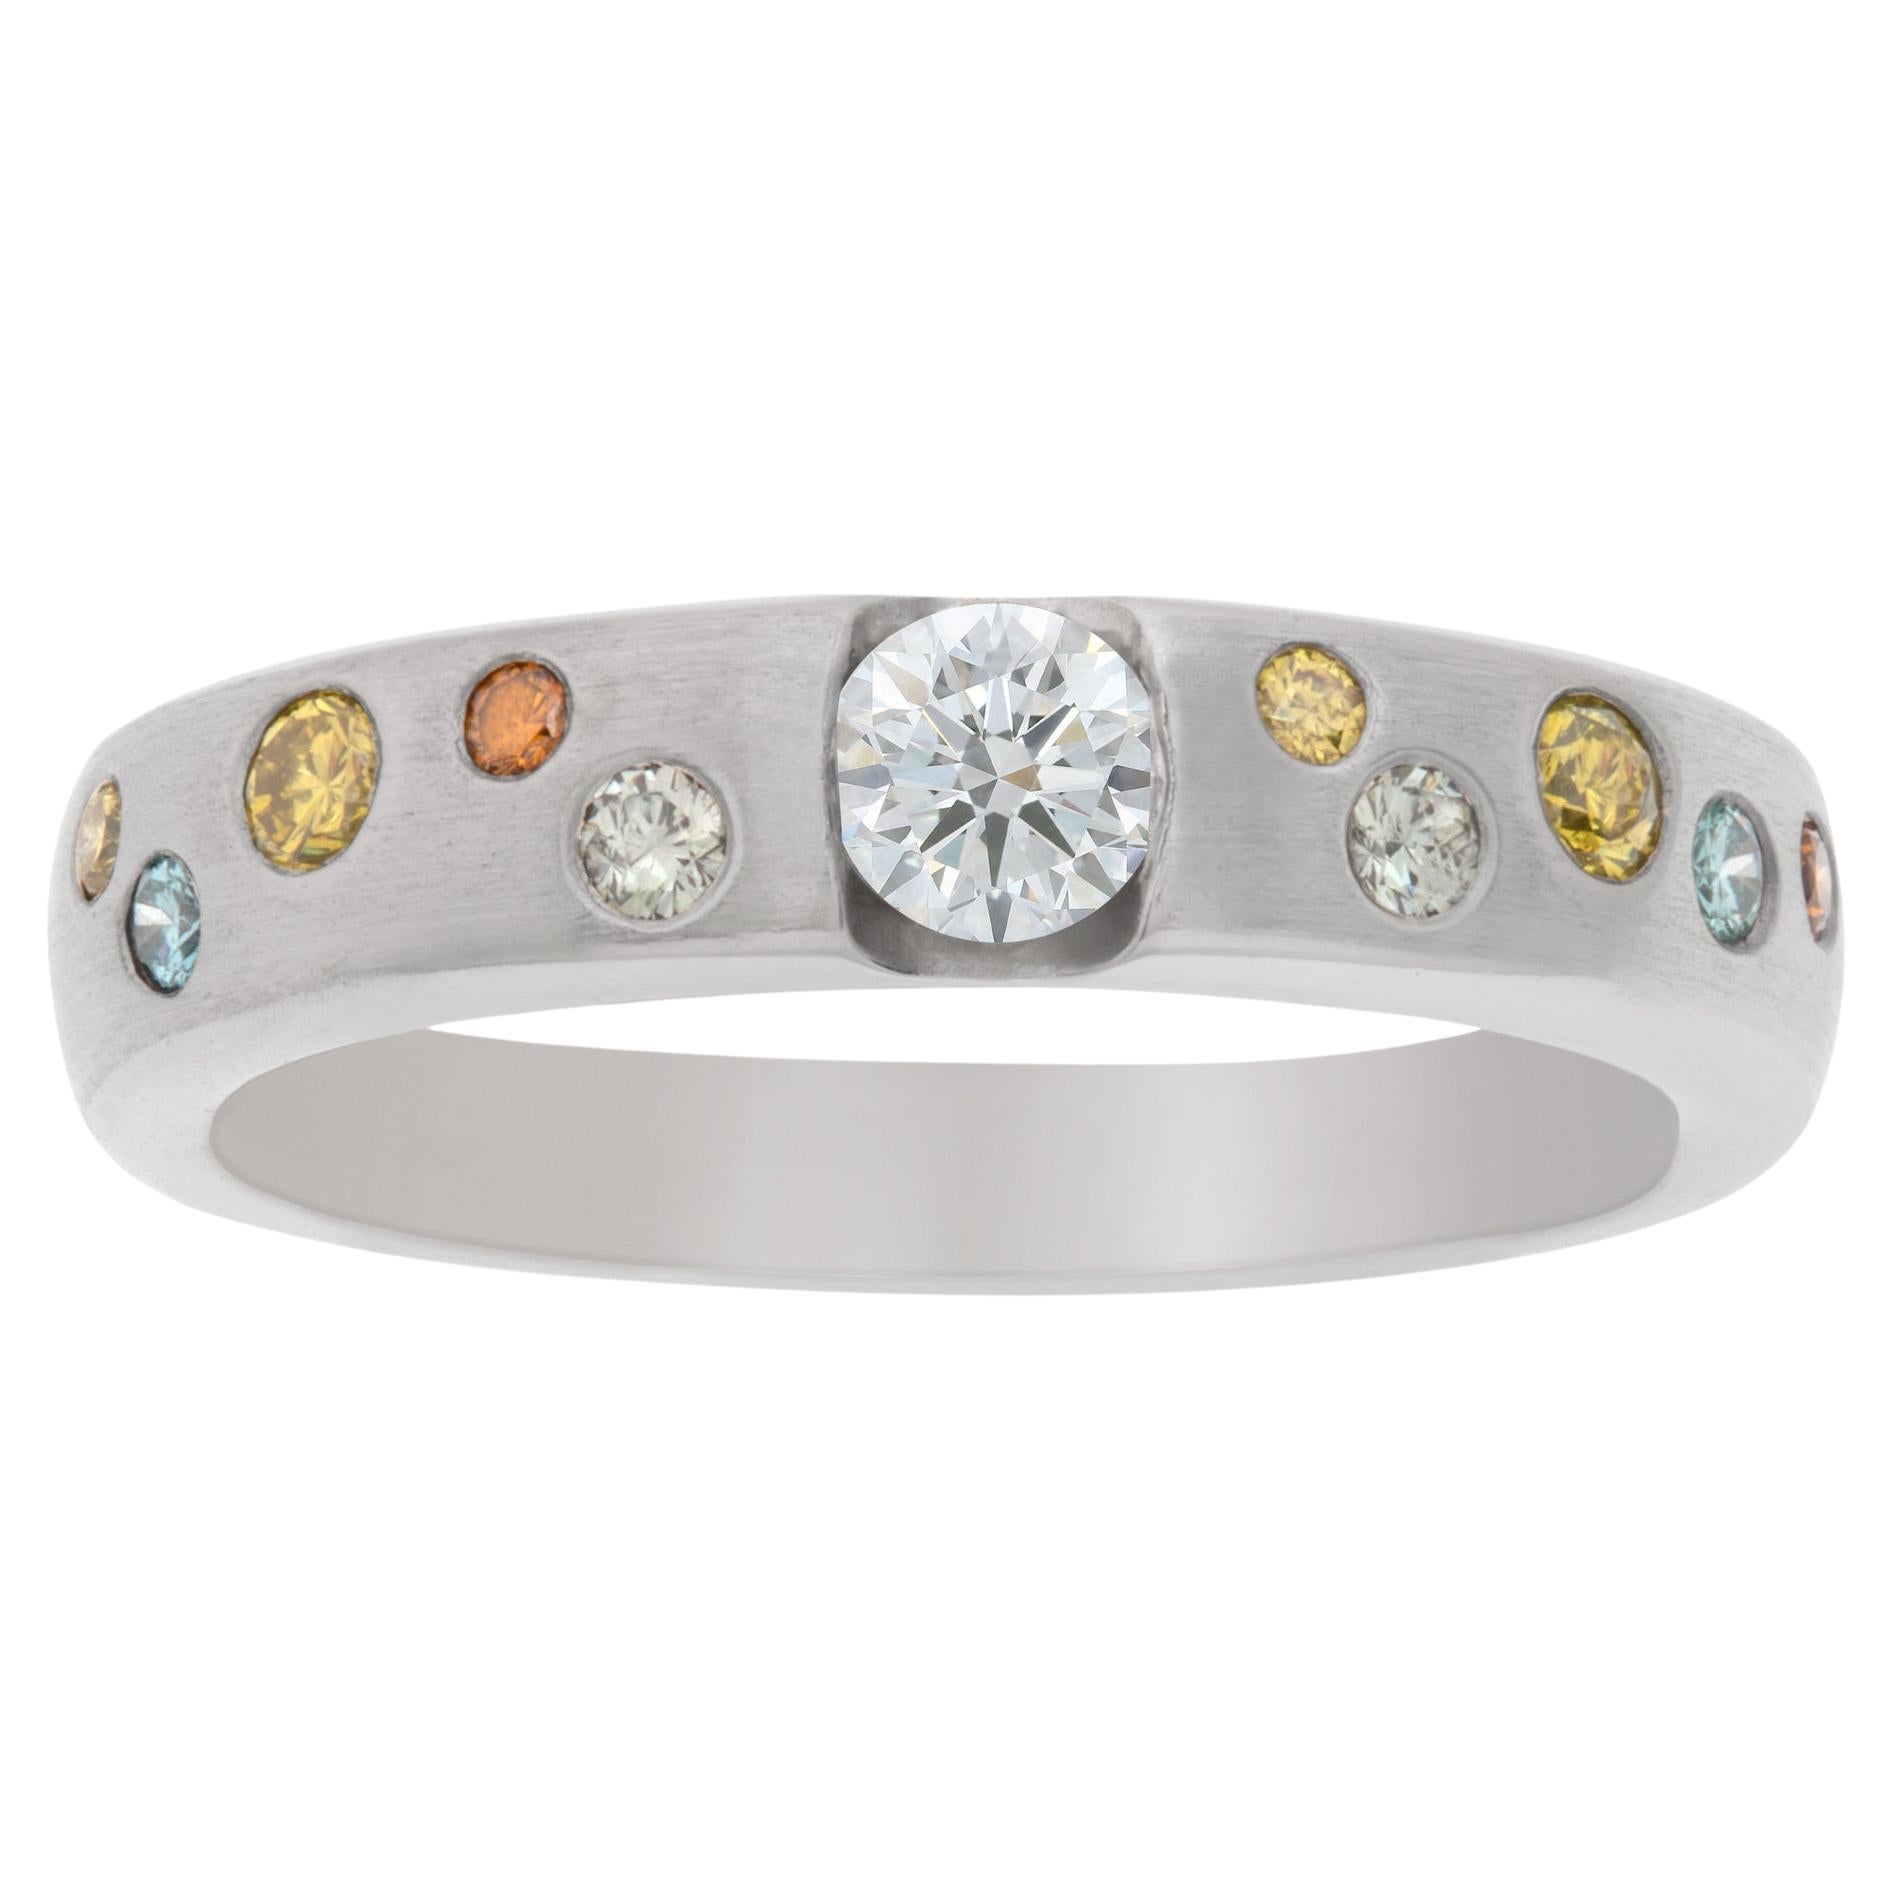 Platinum Ring with Center Diamond and Colorful Accent Stones